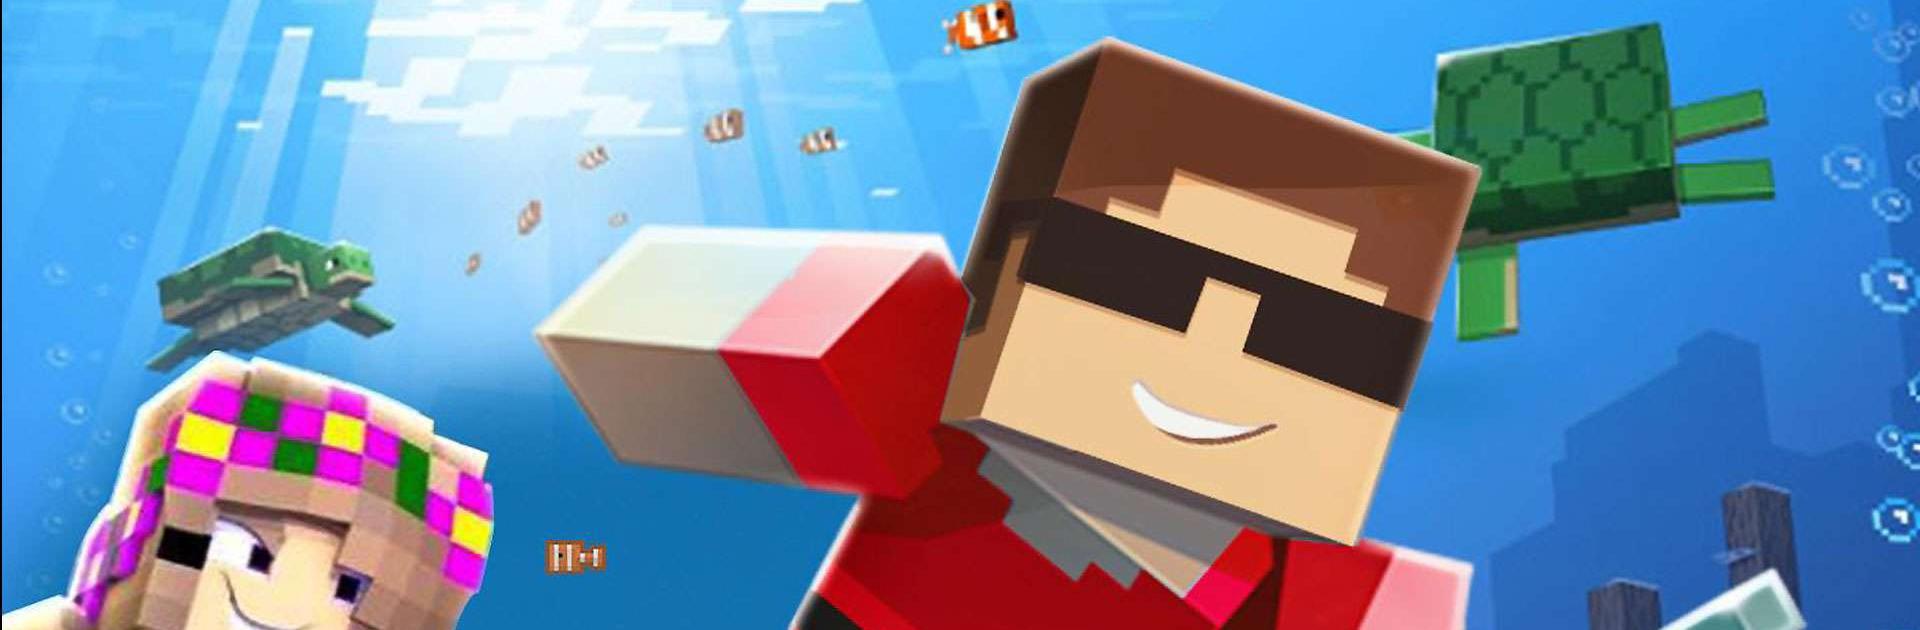 Play Build Block Craft Online for Free on PC and Mobile now.gg